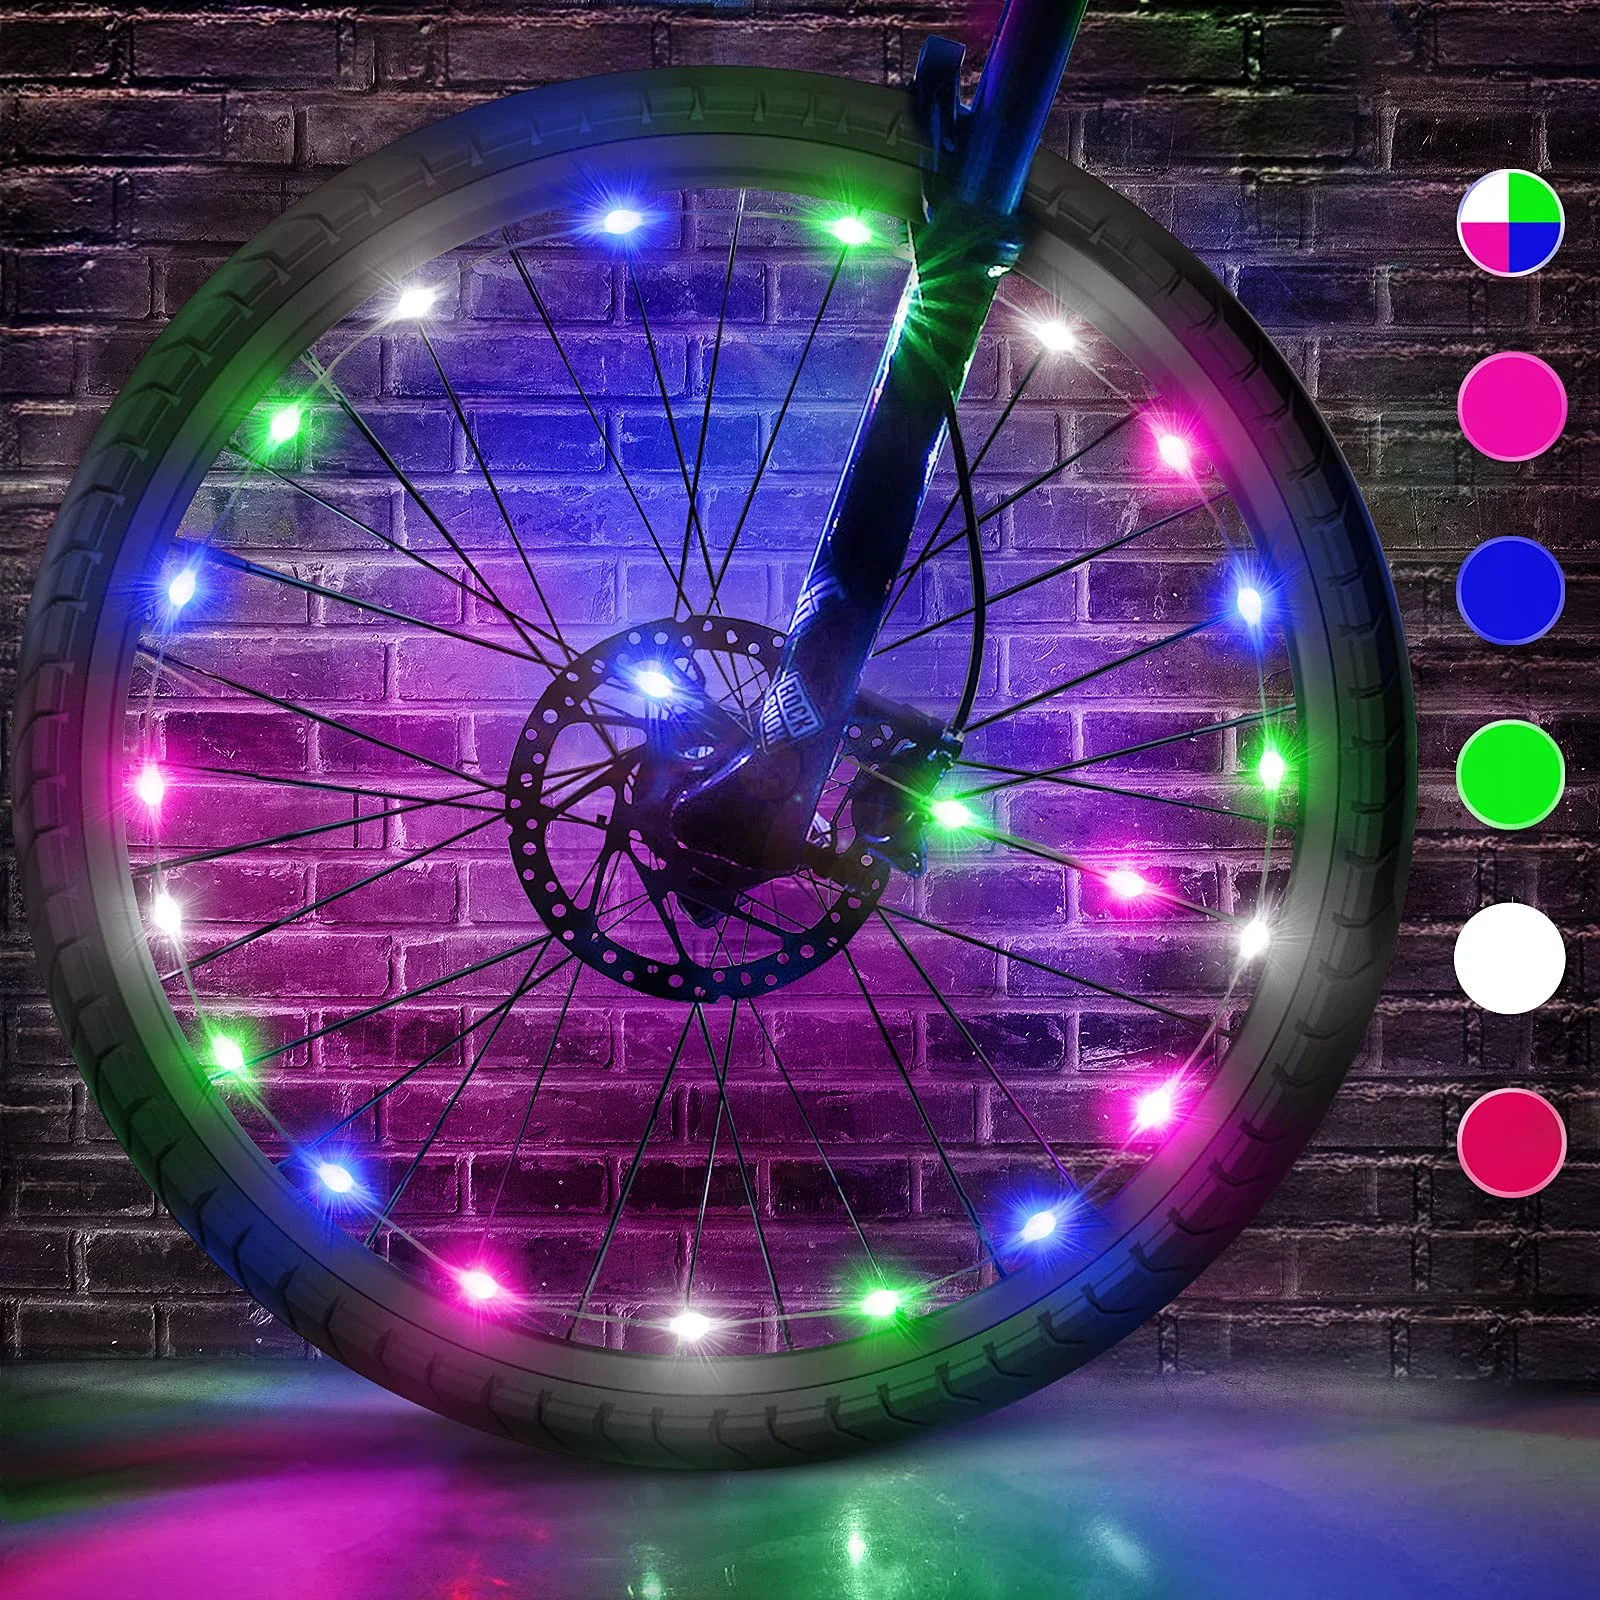 ,Bicycle Spoke Lights with Batteries Included,Bicycle Lights for Wheel,Ultra Bright-Waterproof,Best Gifts for Kids Teens Boys Girls! 2 Wheel Pack Loodika LED Bike Wheel Lights 